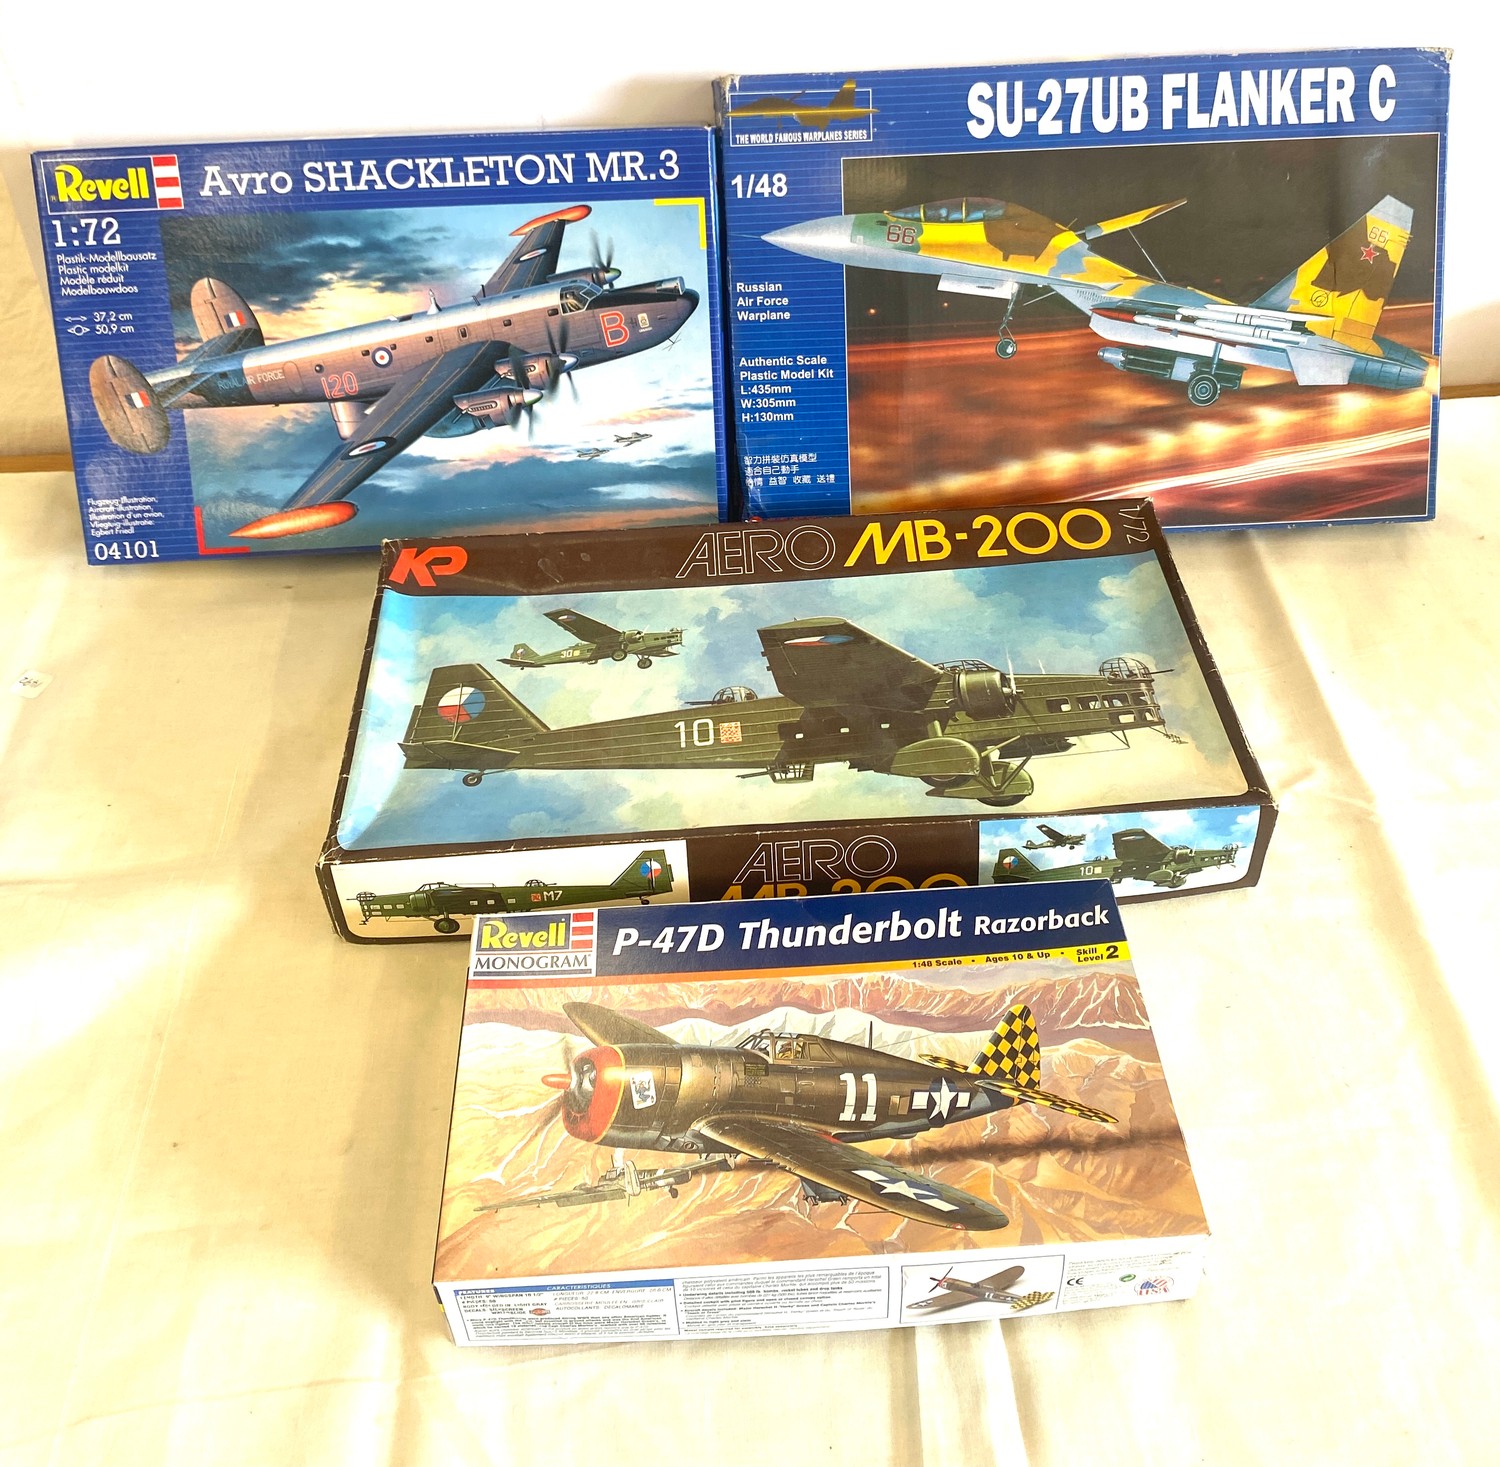 Selection of 4 boxed model air crafts includes, Revell Avro Shackleton MR.3, SU 27ub flawker c, Aero